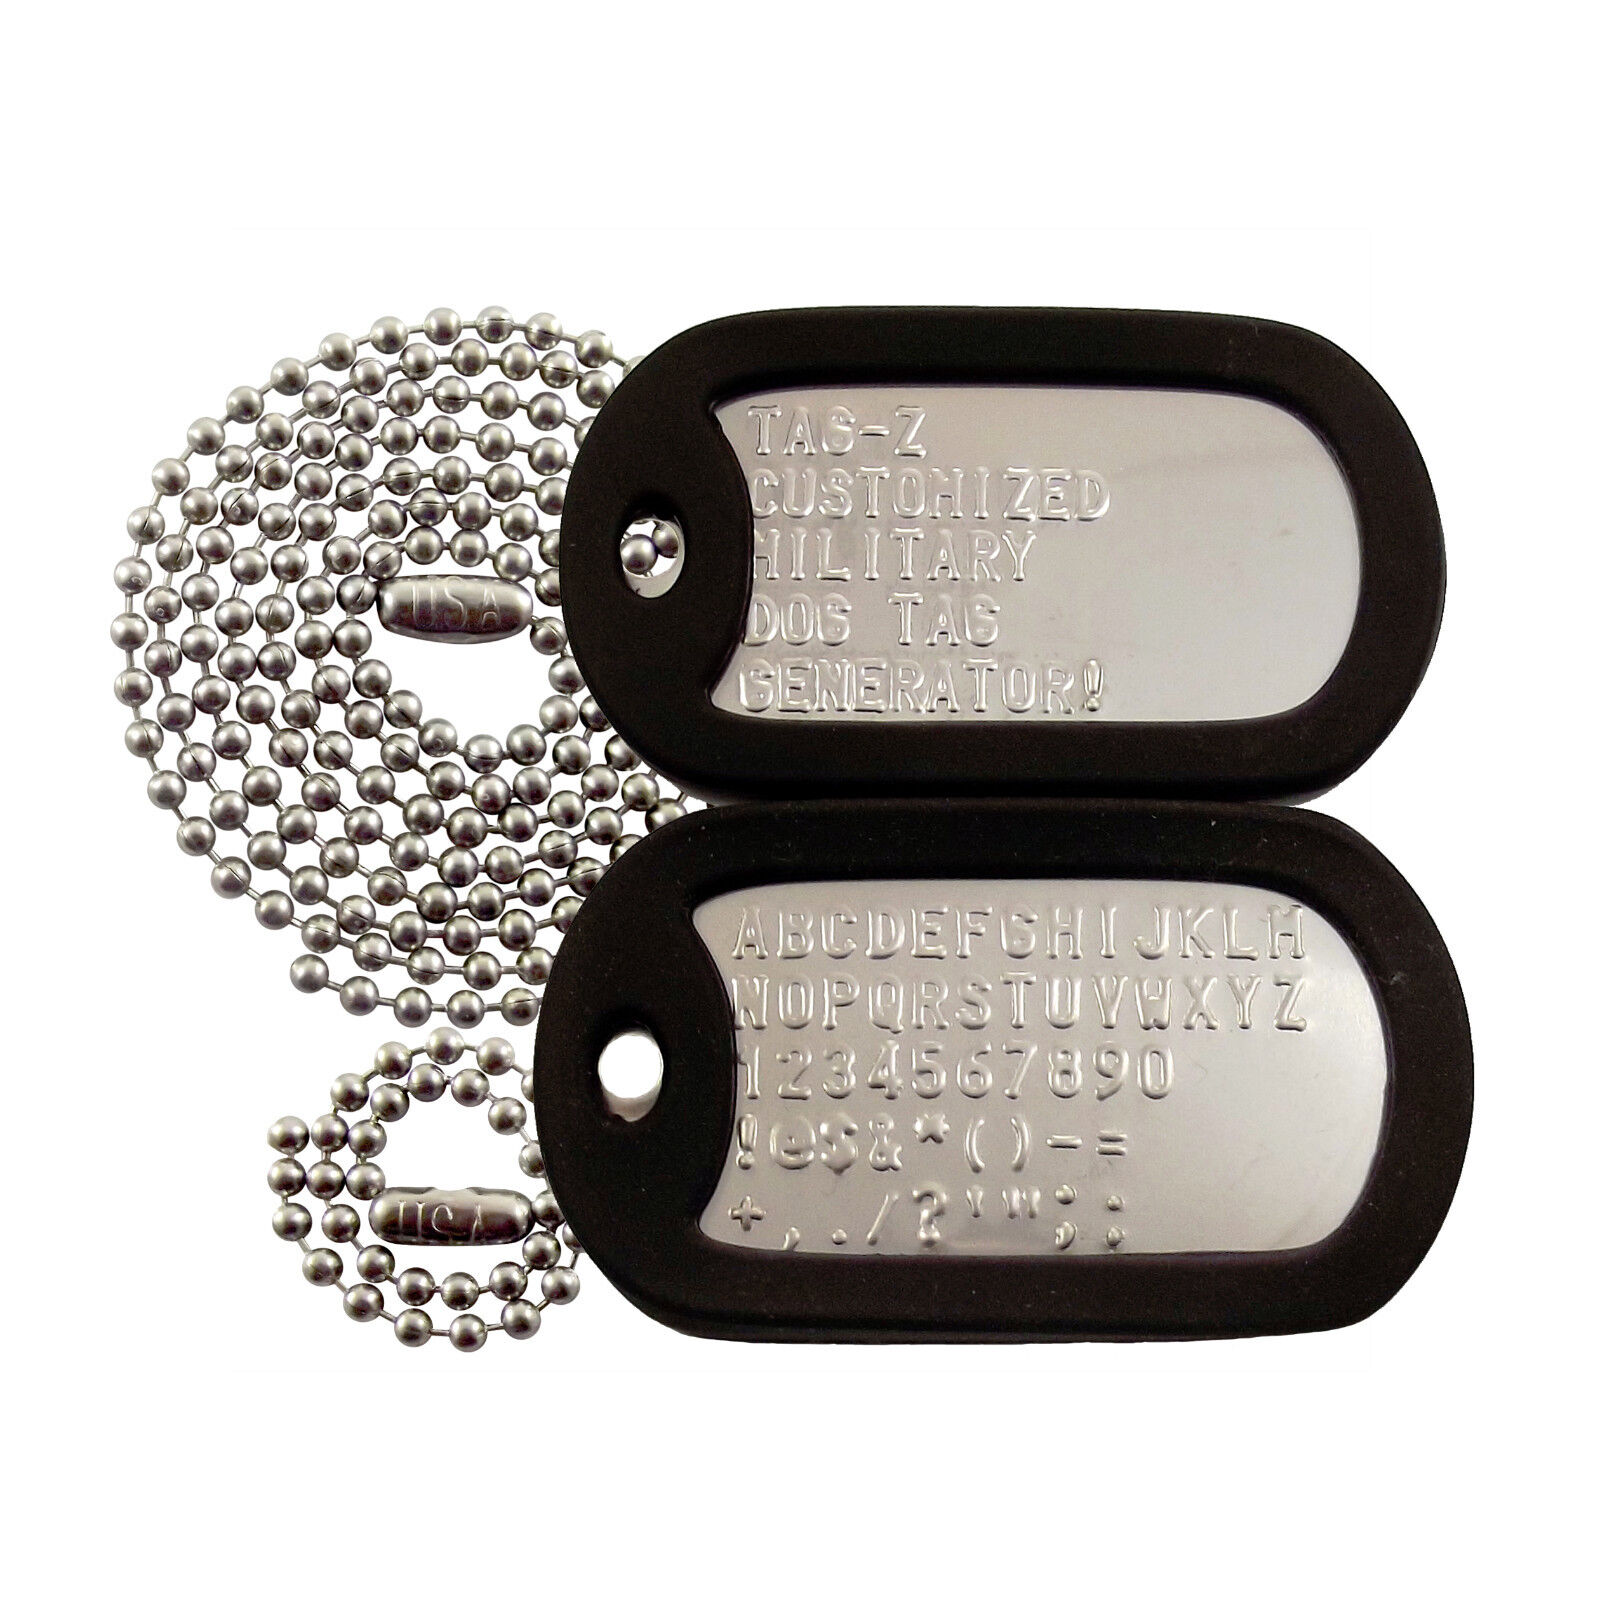 2 Military Dog Tags - Custom Embossed STAINLESS- GI Identification w/ Silencers